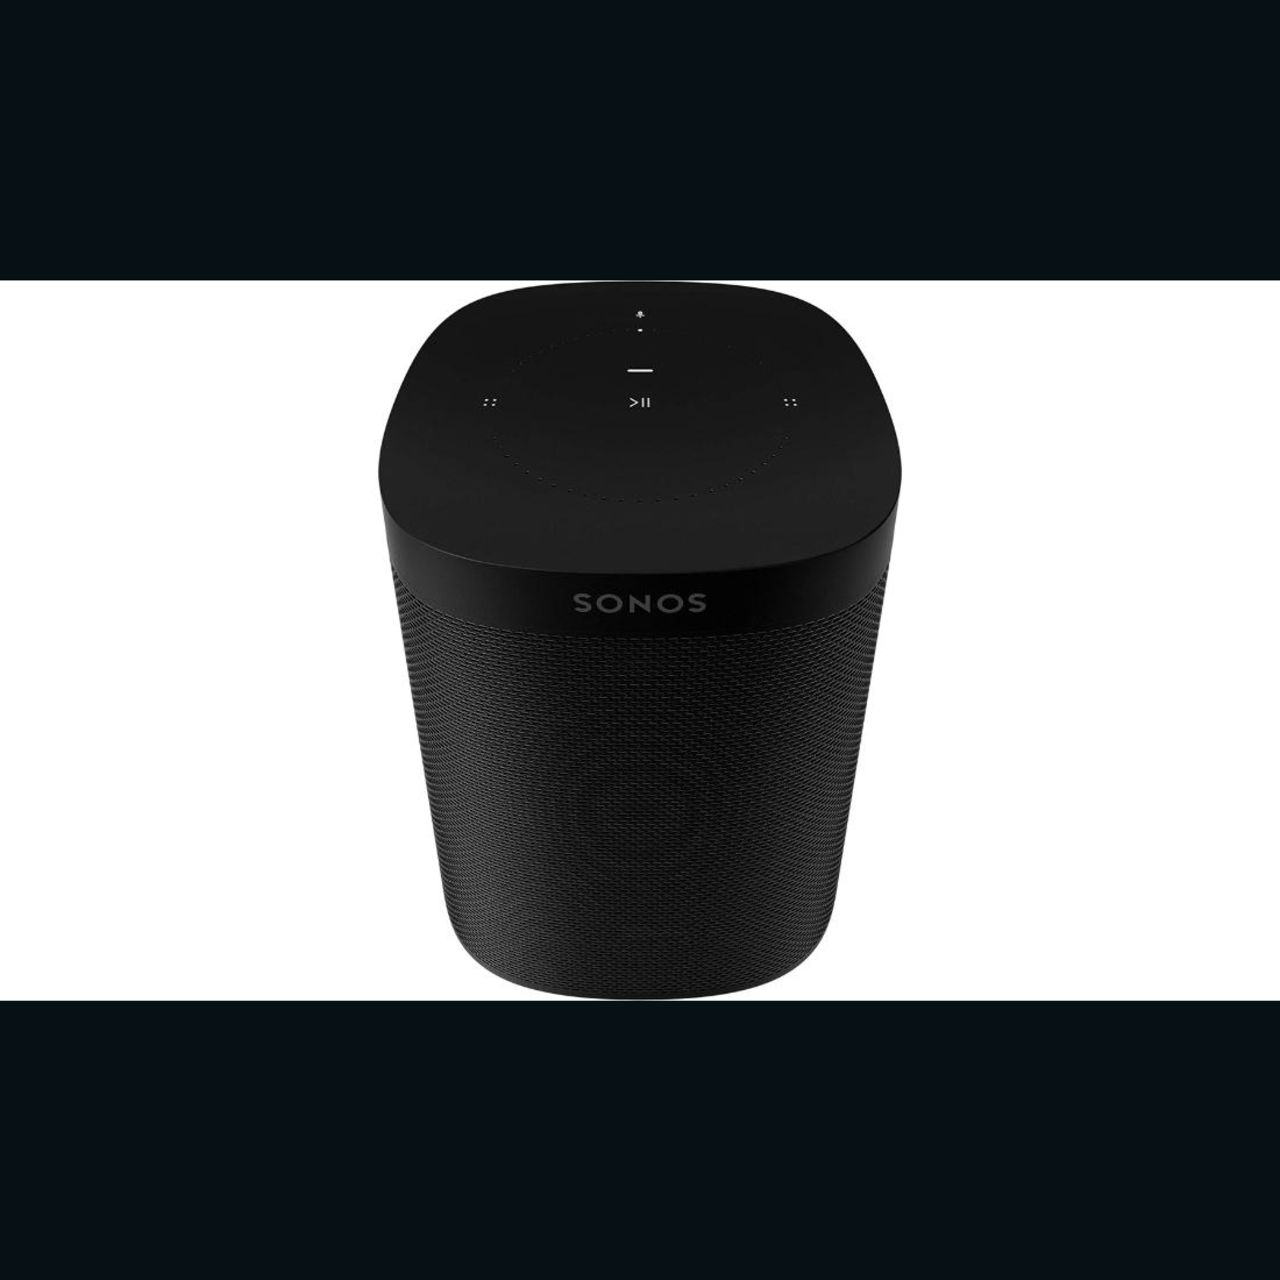 <a href="http://www.anrdoezrs.net/links/8314883/type/dlg/sid/1112mastergiftguide/https://www.sonos.com/en-us/shop/one.html?" target="_blank" target="_blank"><strong>Sonos One Smart Speaker ($199; sonos.com):</strong></a><br />The boundaries of what makes a device "smart" are pushed every day, and the Sonos One is a prime example. This speaker has exquisite sound quality and can fill a room. This is especially true given its ability to assess the acoustics of a room and adjust accordingly. With two of these babies synced, you'll get a stereo sound unlike any other. It also has built-in Alexa and Google Assistant capability, so it's easy to command your music with your voice.<br />